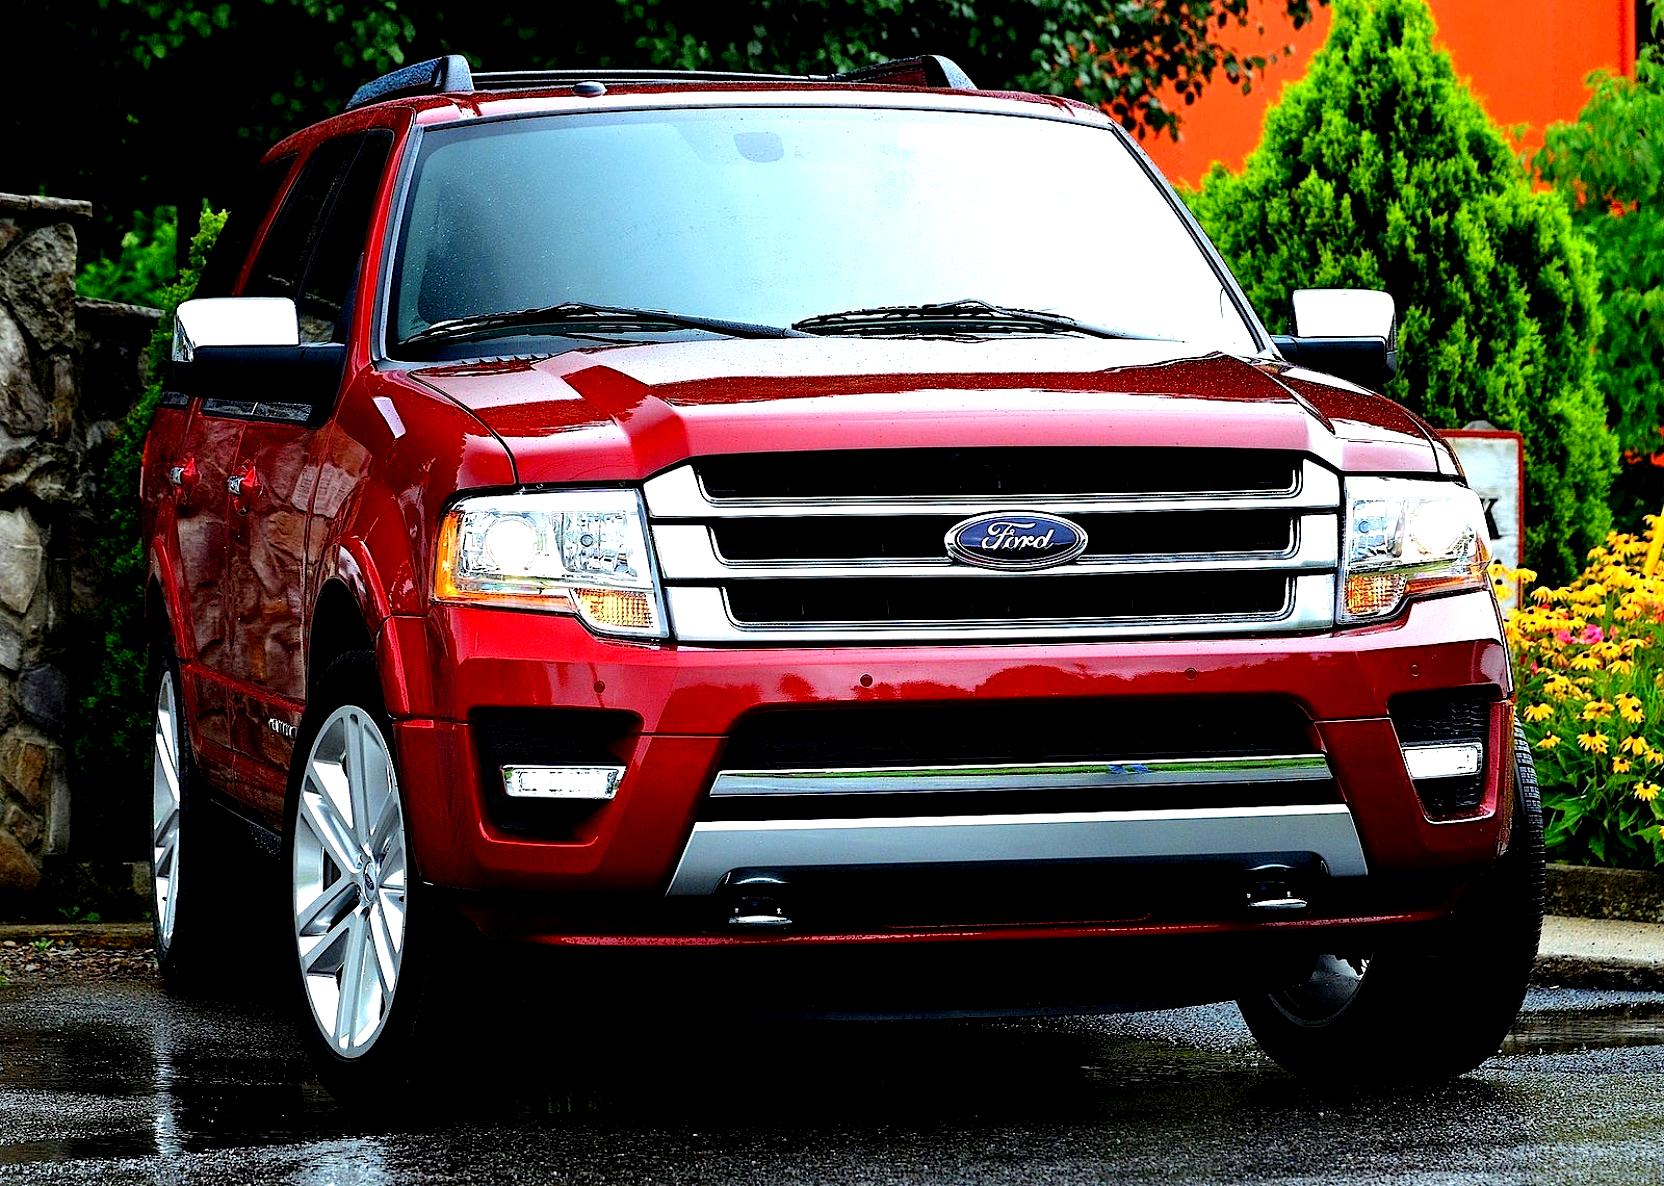 Ford Expedition 2014 #87